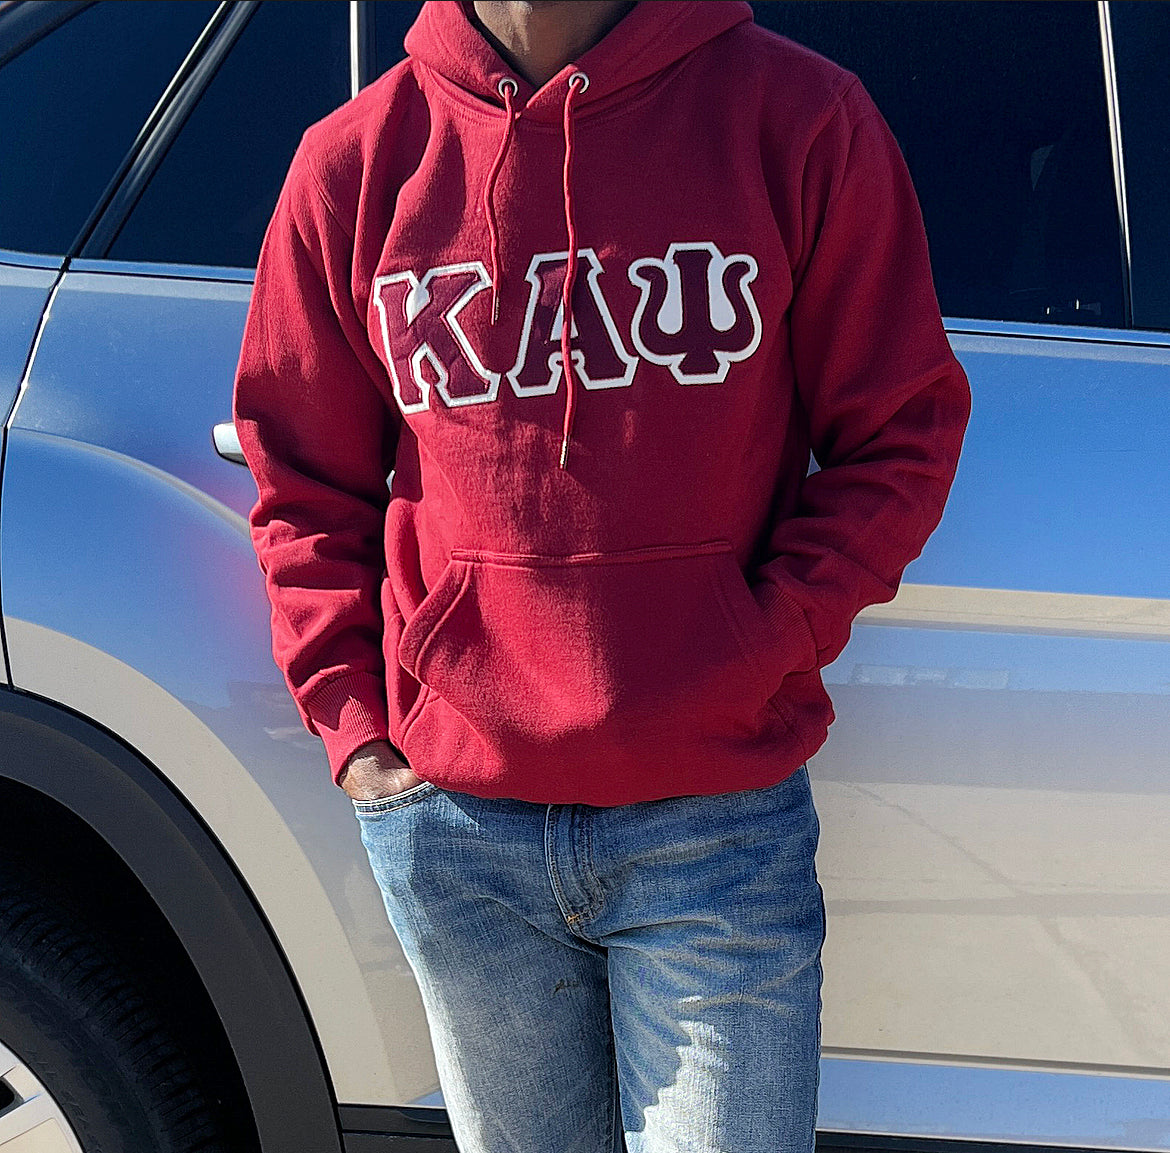 Kappa Alpha Psi Premium Double Stitched Appliqué Embroidery Lettered Hoodie. This is the perfect long-sleeved hoodie to wear while showing off your Kappa Alpha Psi fraternity lettering. A comfortable 100% cotton tee with a twill Greek letters embroidery across the chest give you the perfect fit. This hoodie is also a perfect gift for your favorite Kappa Man.